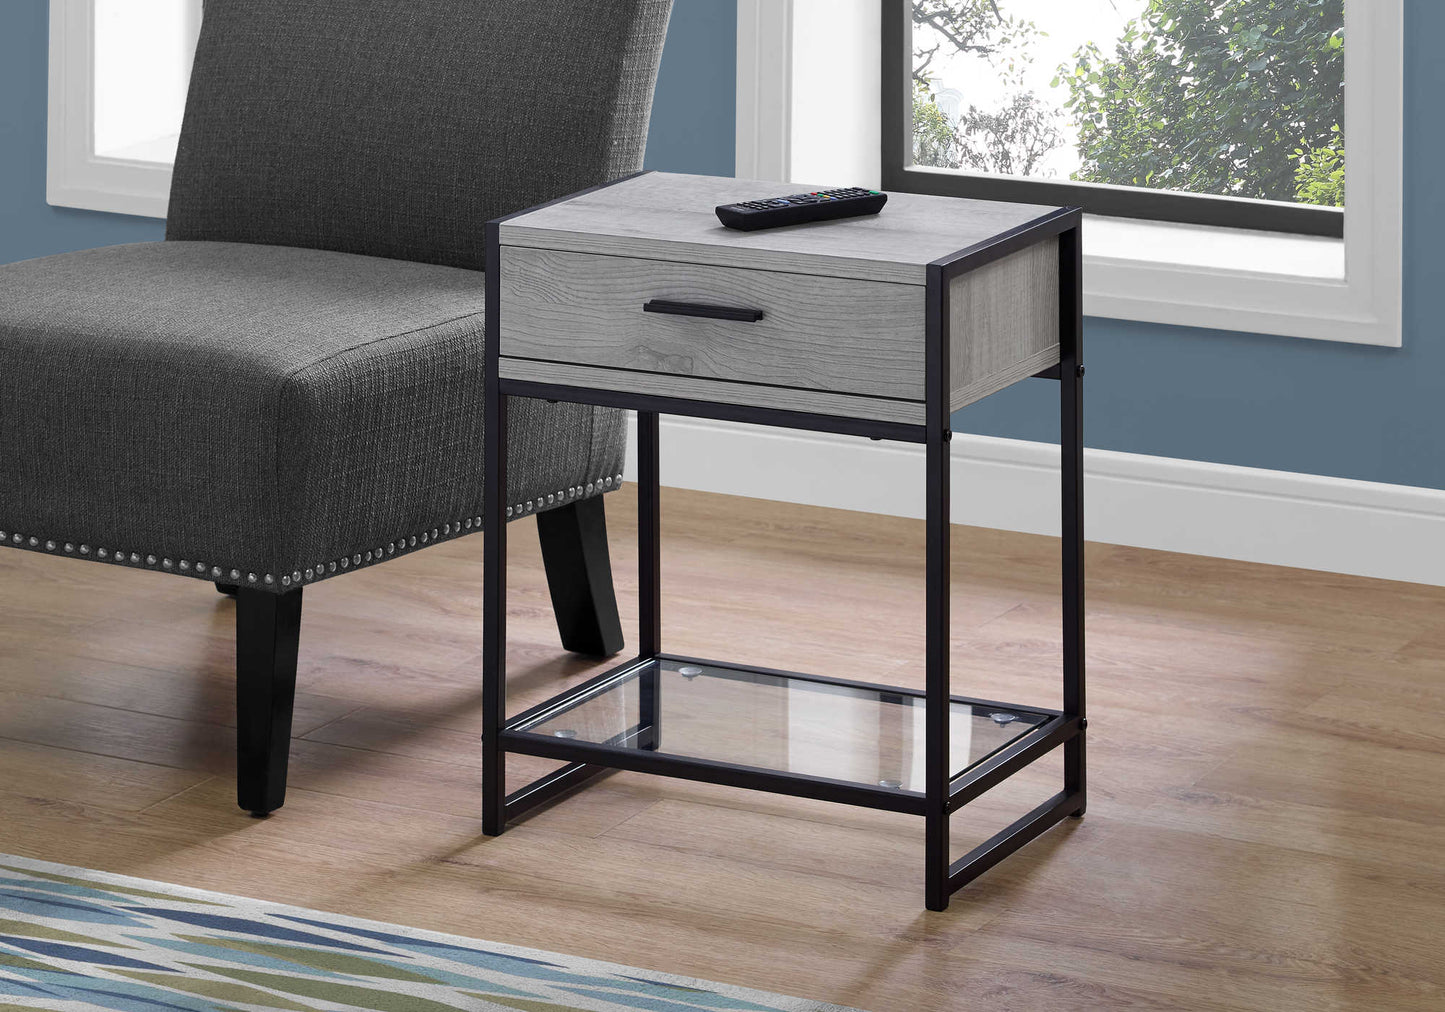 18"L/22"H Modern Laminate Nightstand with Metal Frame and Glass Shelf